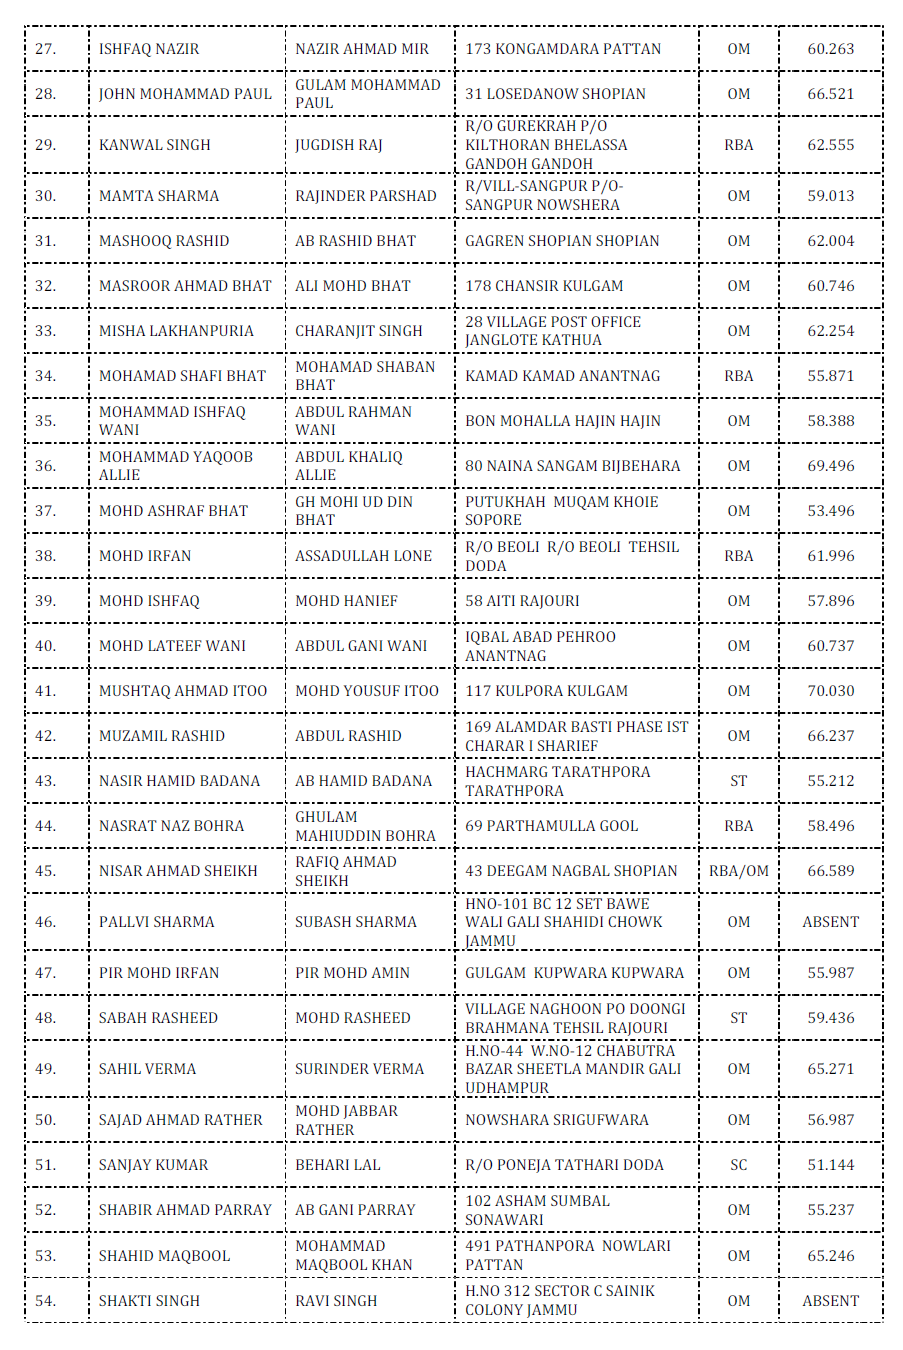 jkpsc history aeiro 2 Jammu and Kashmir Public Service Commission : Selection List for the posts of Lecturer 10+2 (History) in School Education Department